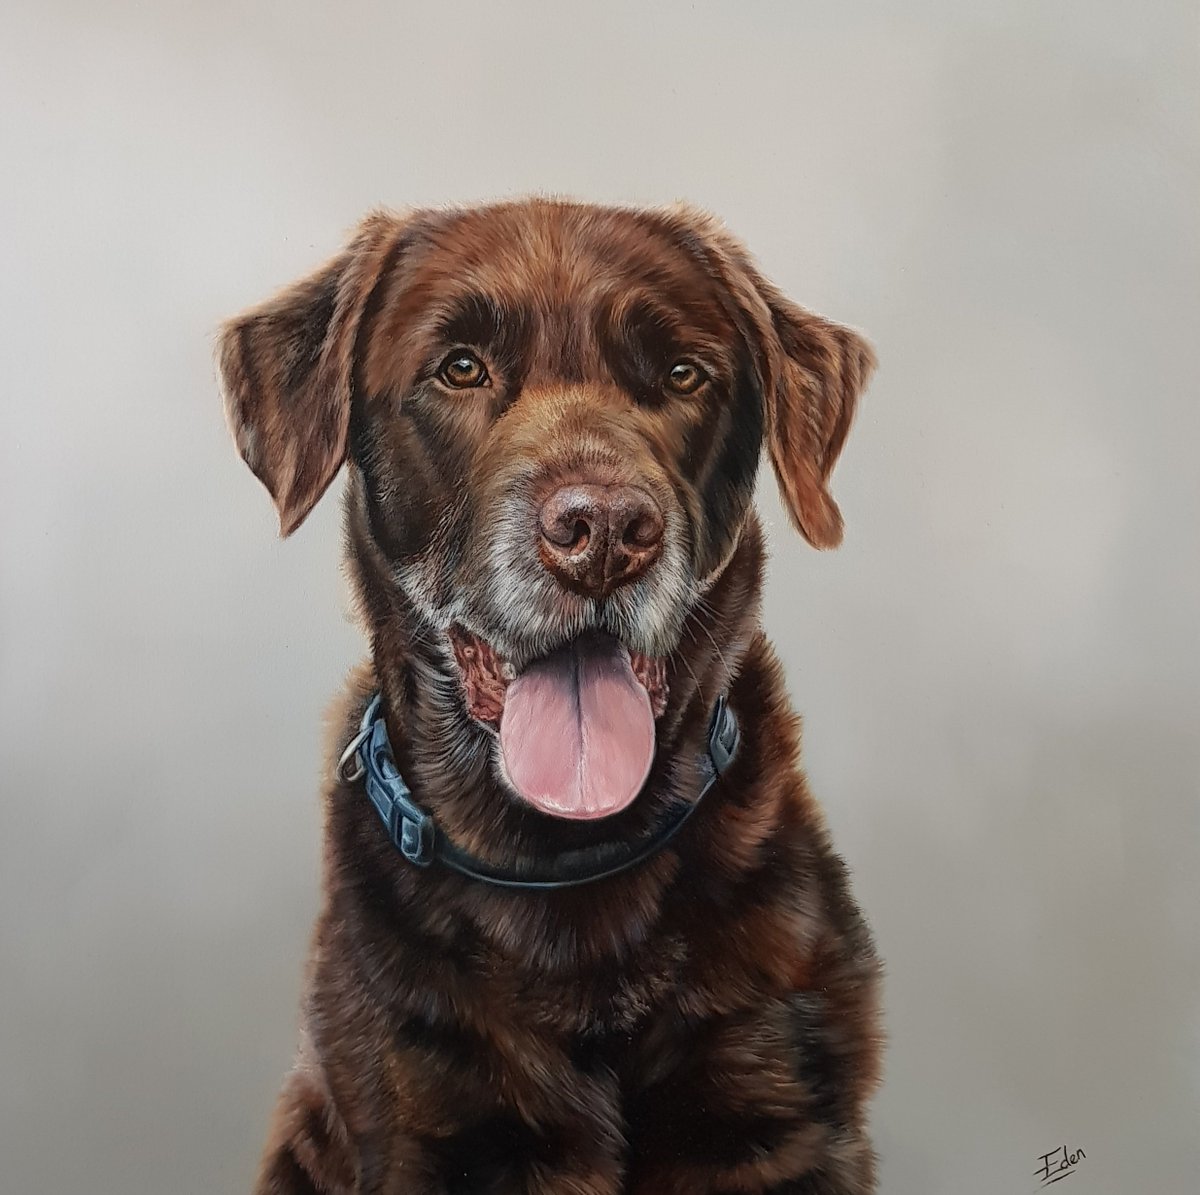 Another pre Christmas commission! 'Mojo' oil on board,  16 x 16'

If you're interested in a commissionn of your own, please message me for further info 😊

#chocolatelabrador #chocolatelab #choclab #labrador #labradorportrait #petportrait